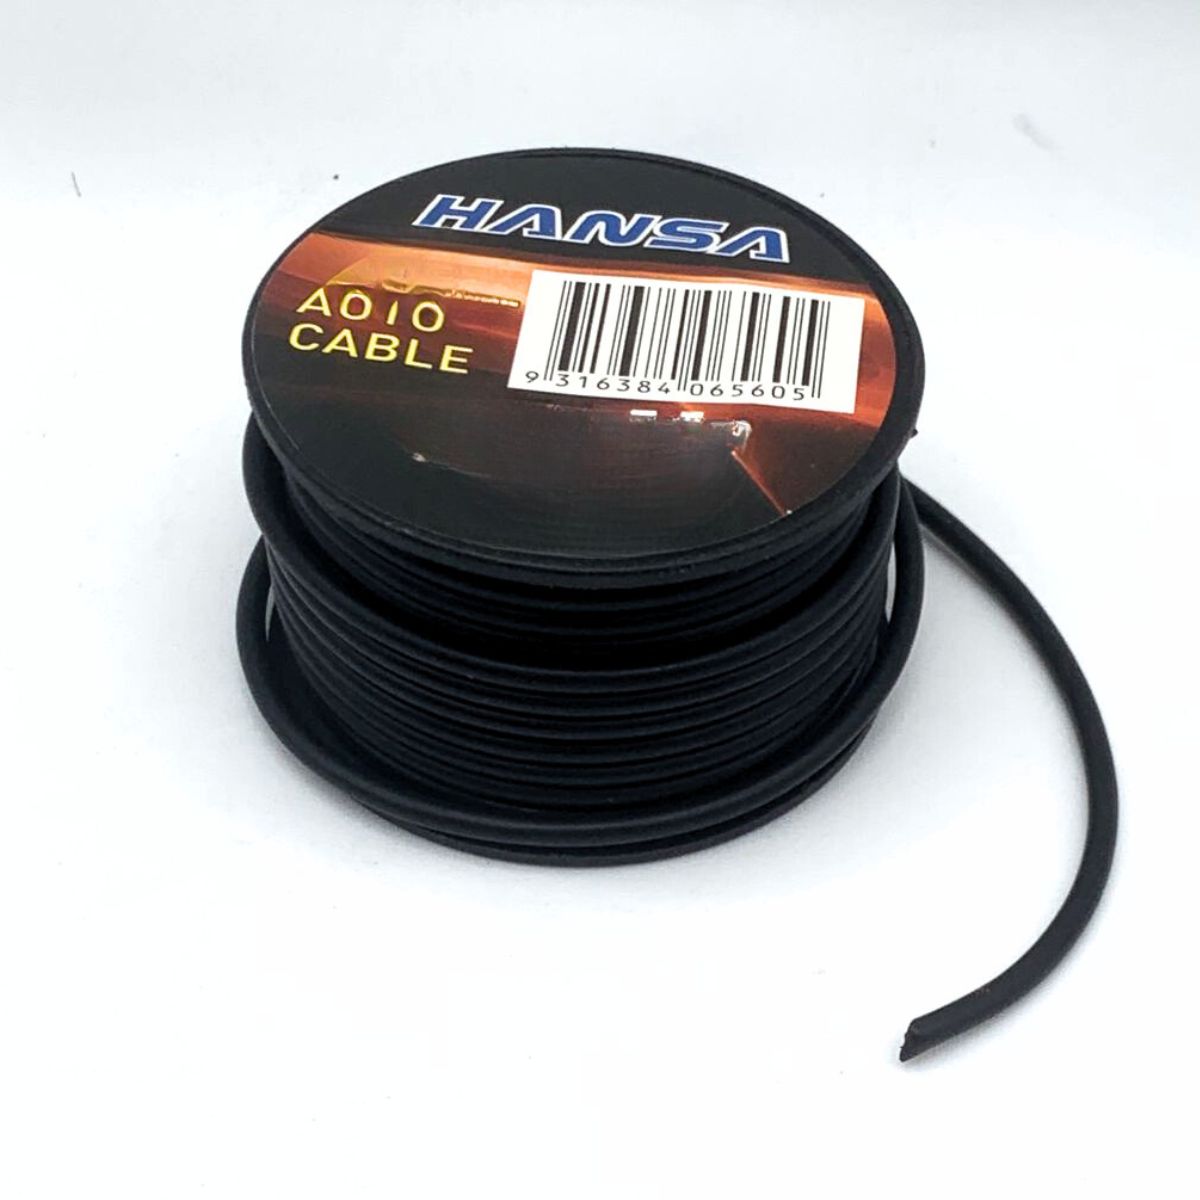 15 Amp Auto Cable, 4 Metres (Black) - South East Clearance Centre